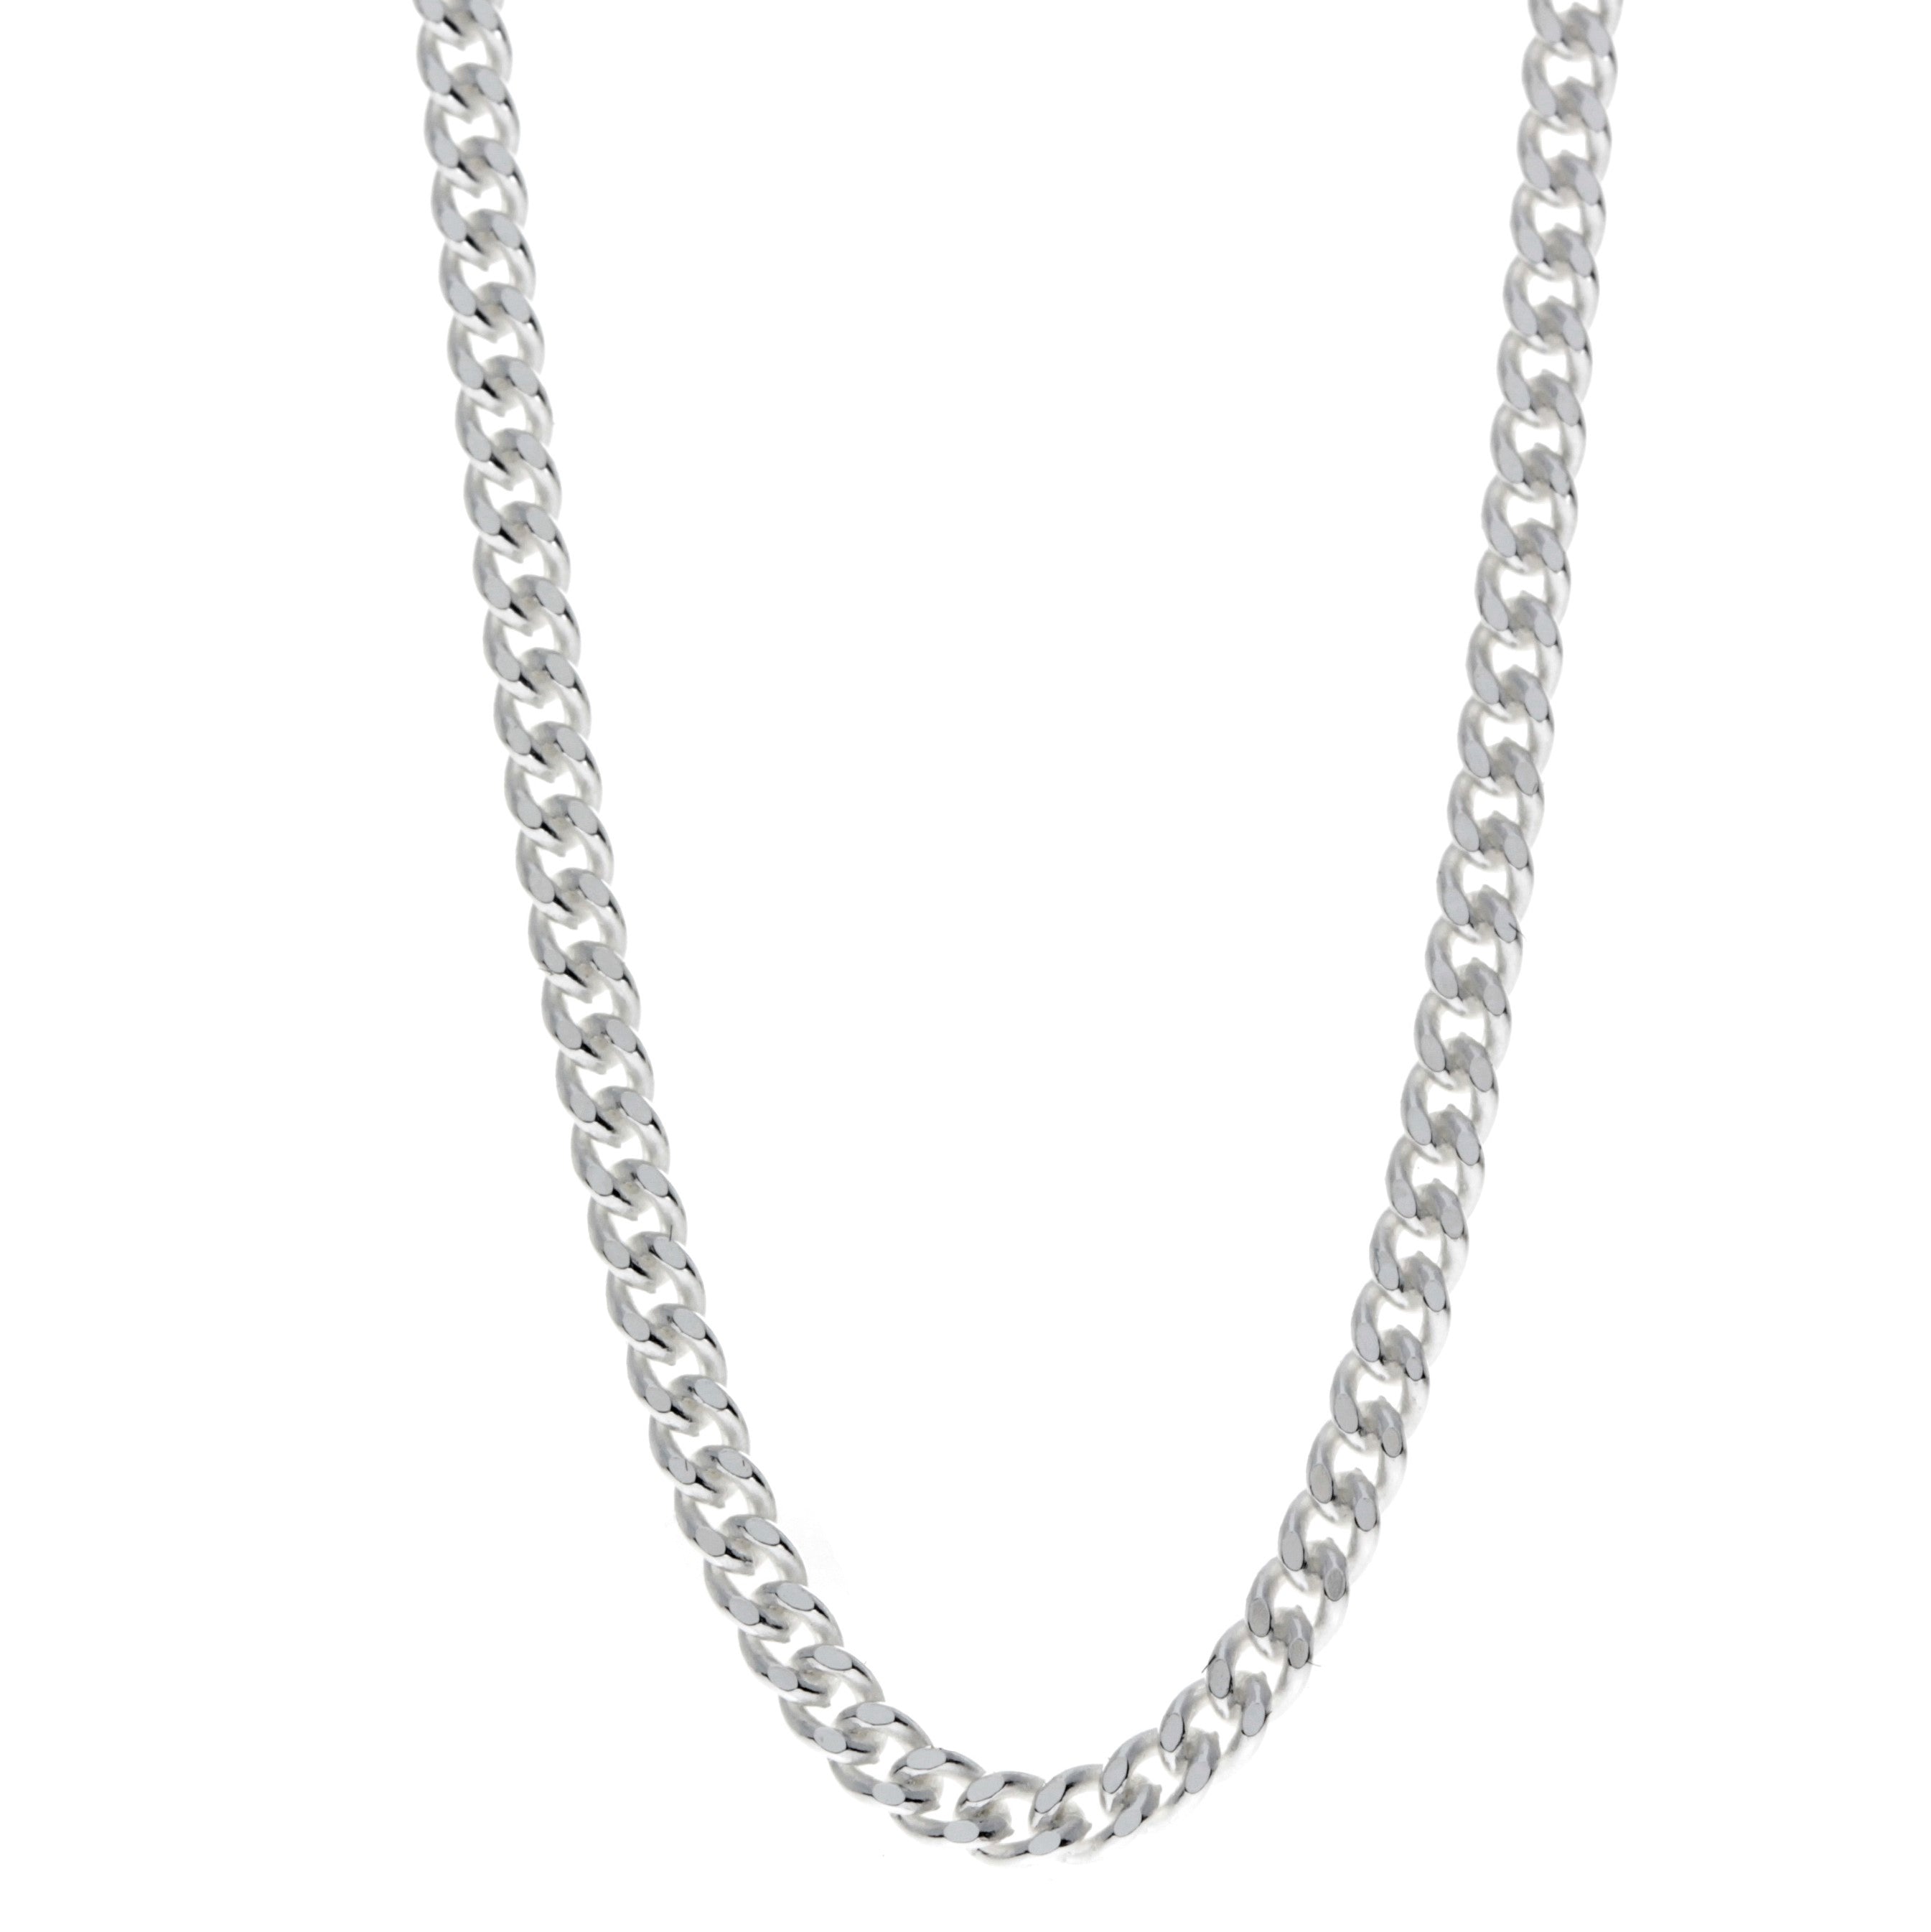 ITALY - 925 Silver - Necklace - Catawiki